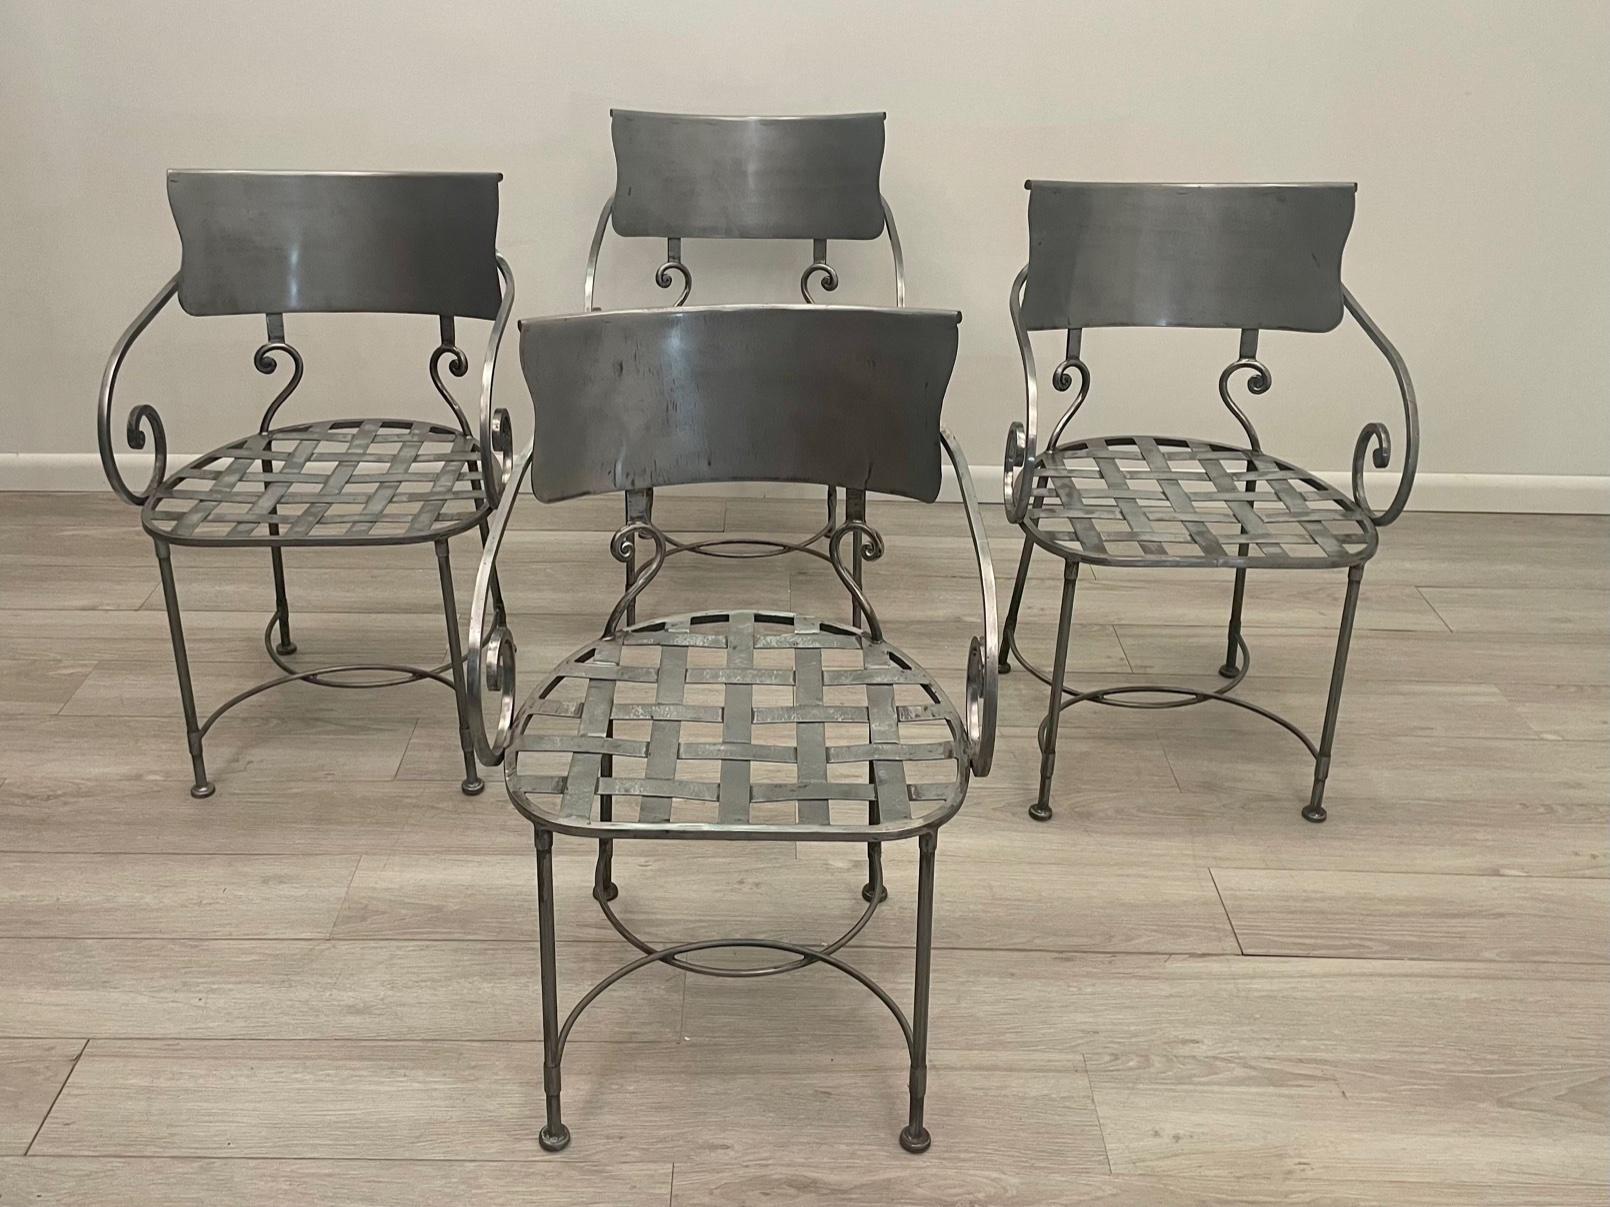 Chic set of 4 very stylish hand wrought iron armchairs for dining having a matte silver patina, curved back and elegant curlicue arms.